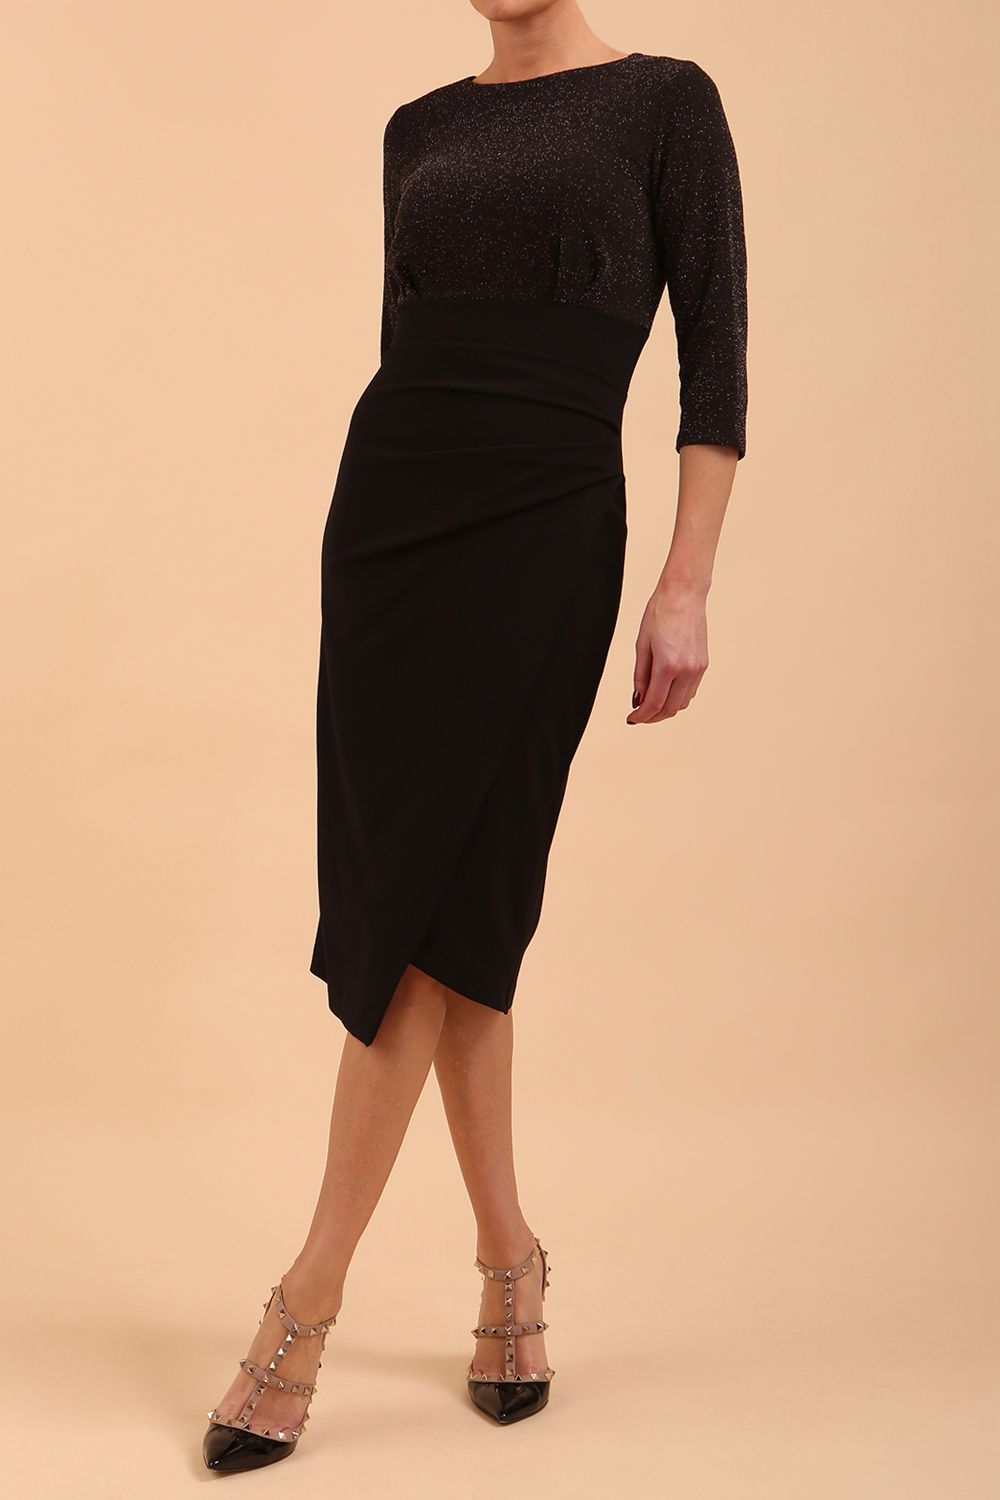 model is wearing diva catwalk contrast pencil dress with sleeve and assymetric skirt detail in black and black sparkle front